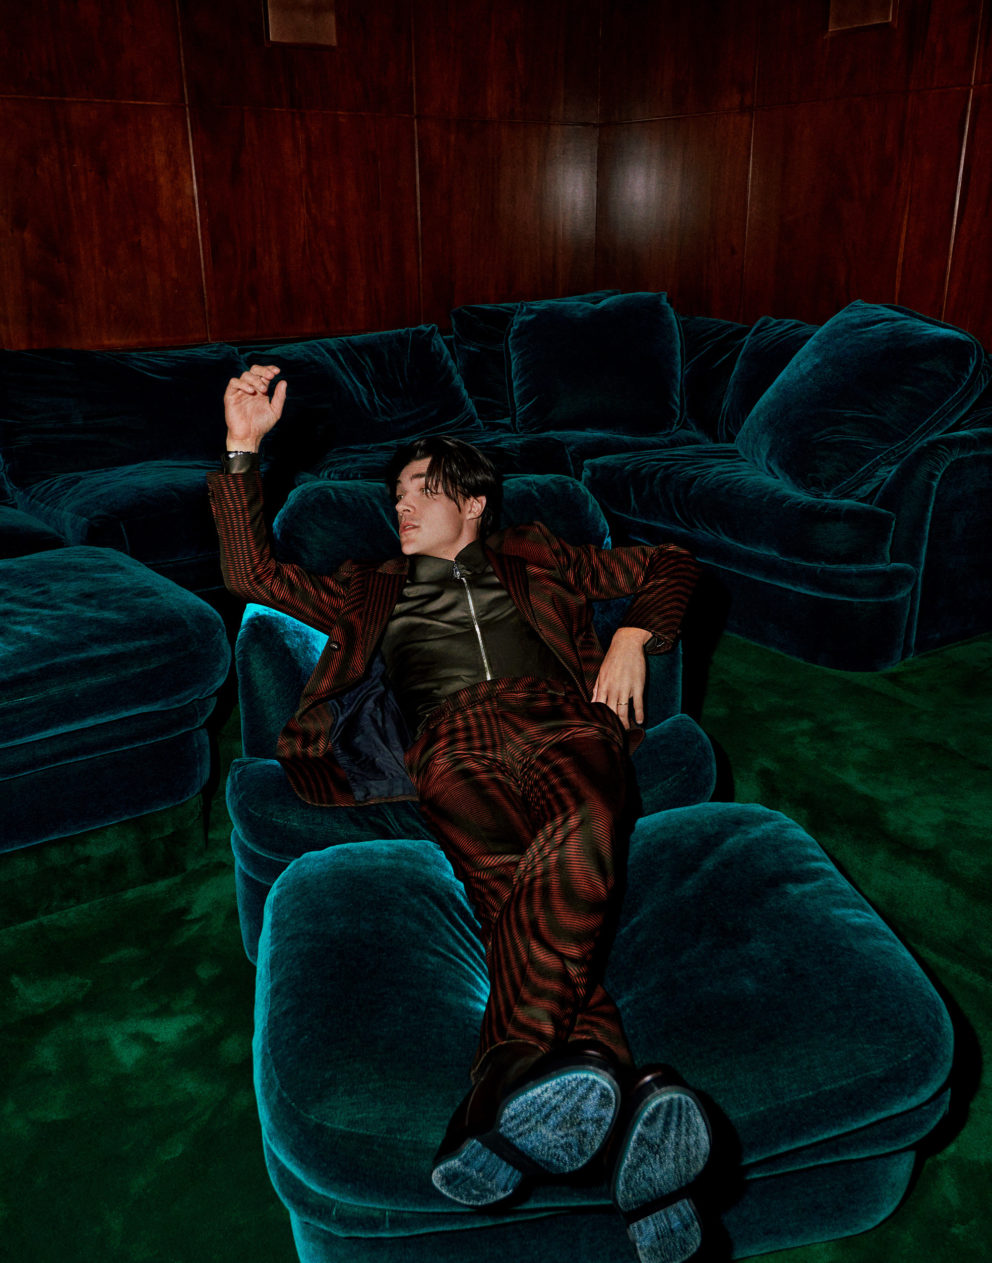 201026 0060 Esquire Finn Wittrock 078 By Christian Hogstedt